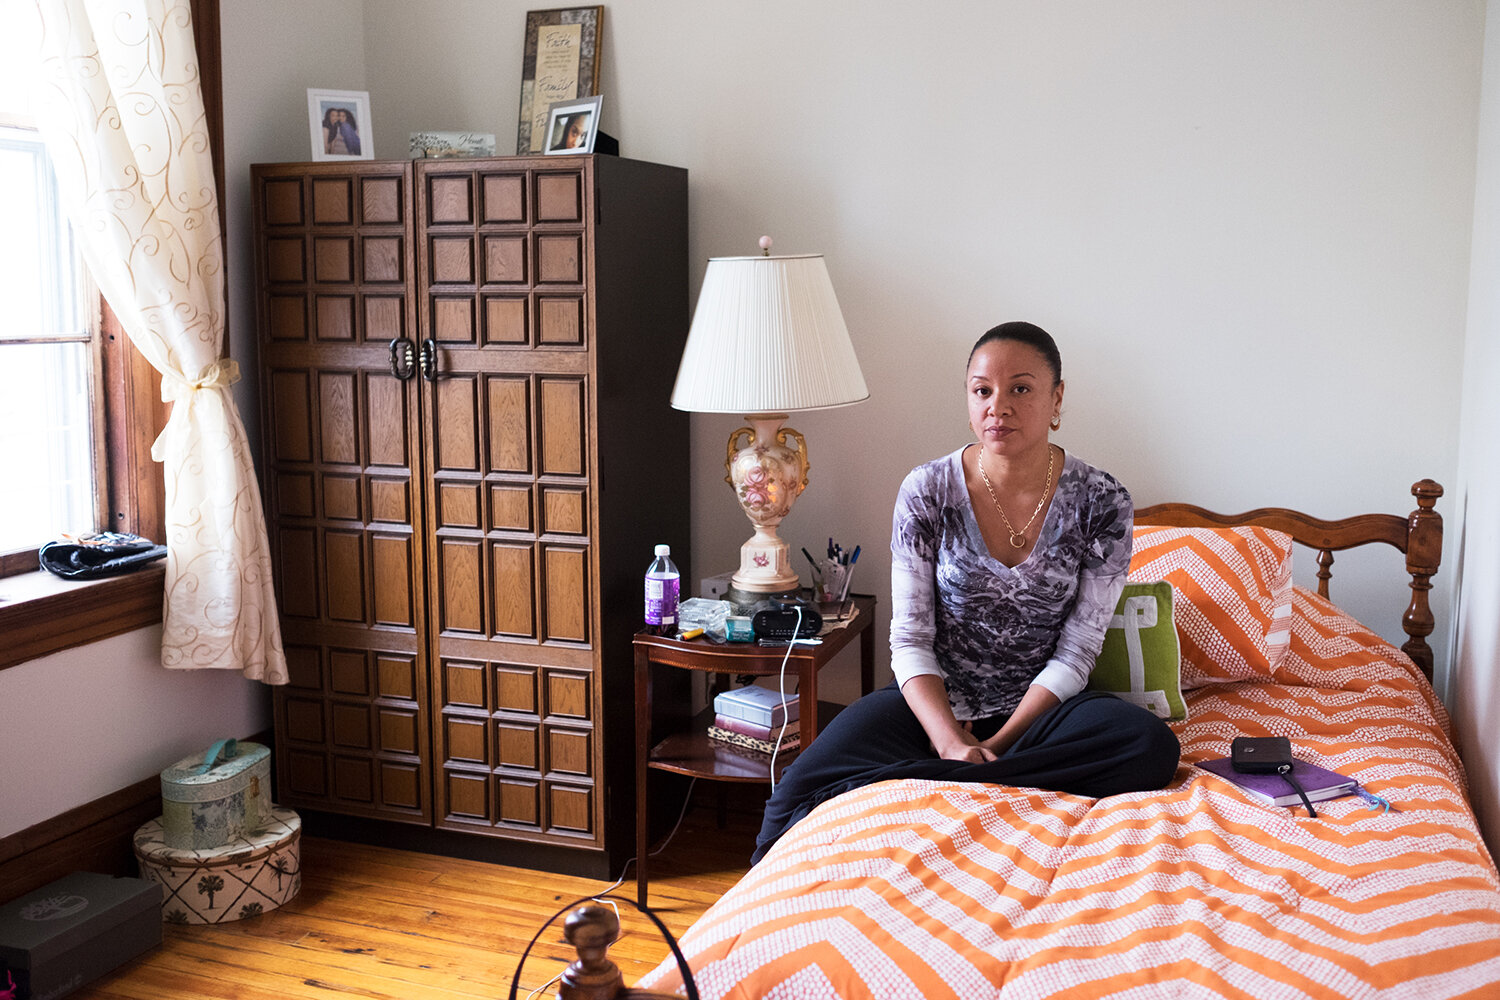  Keila, 40, in transitional housing six months after her release. Astoria, NY, 2014. Image © Sara Bennett. 